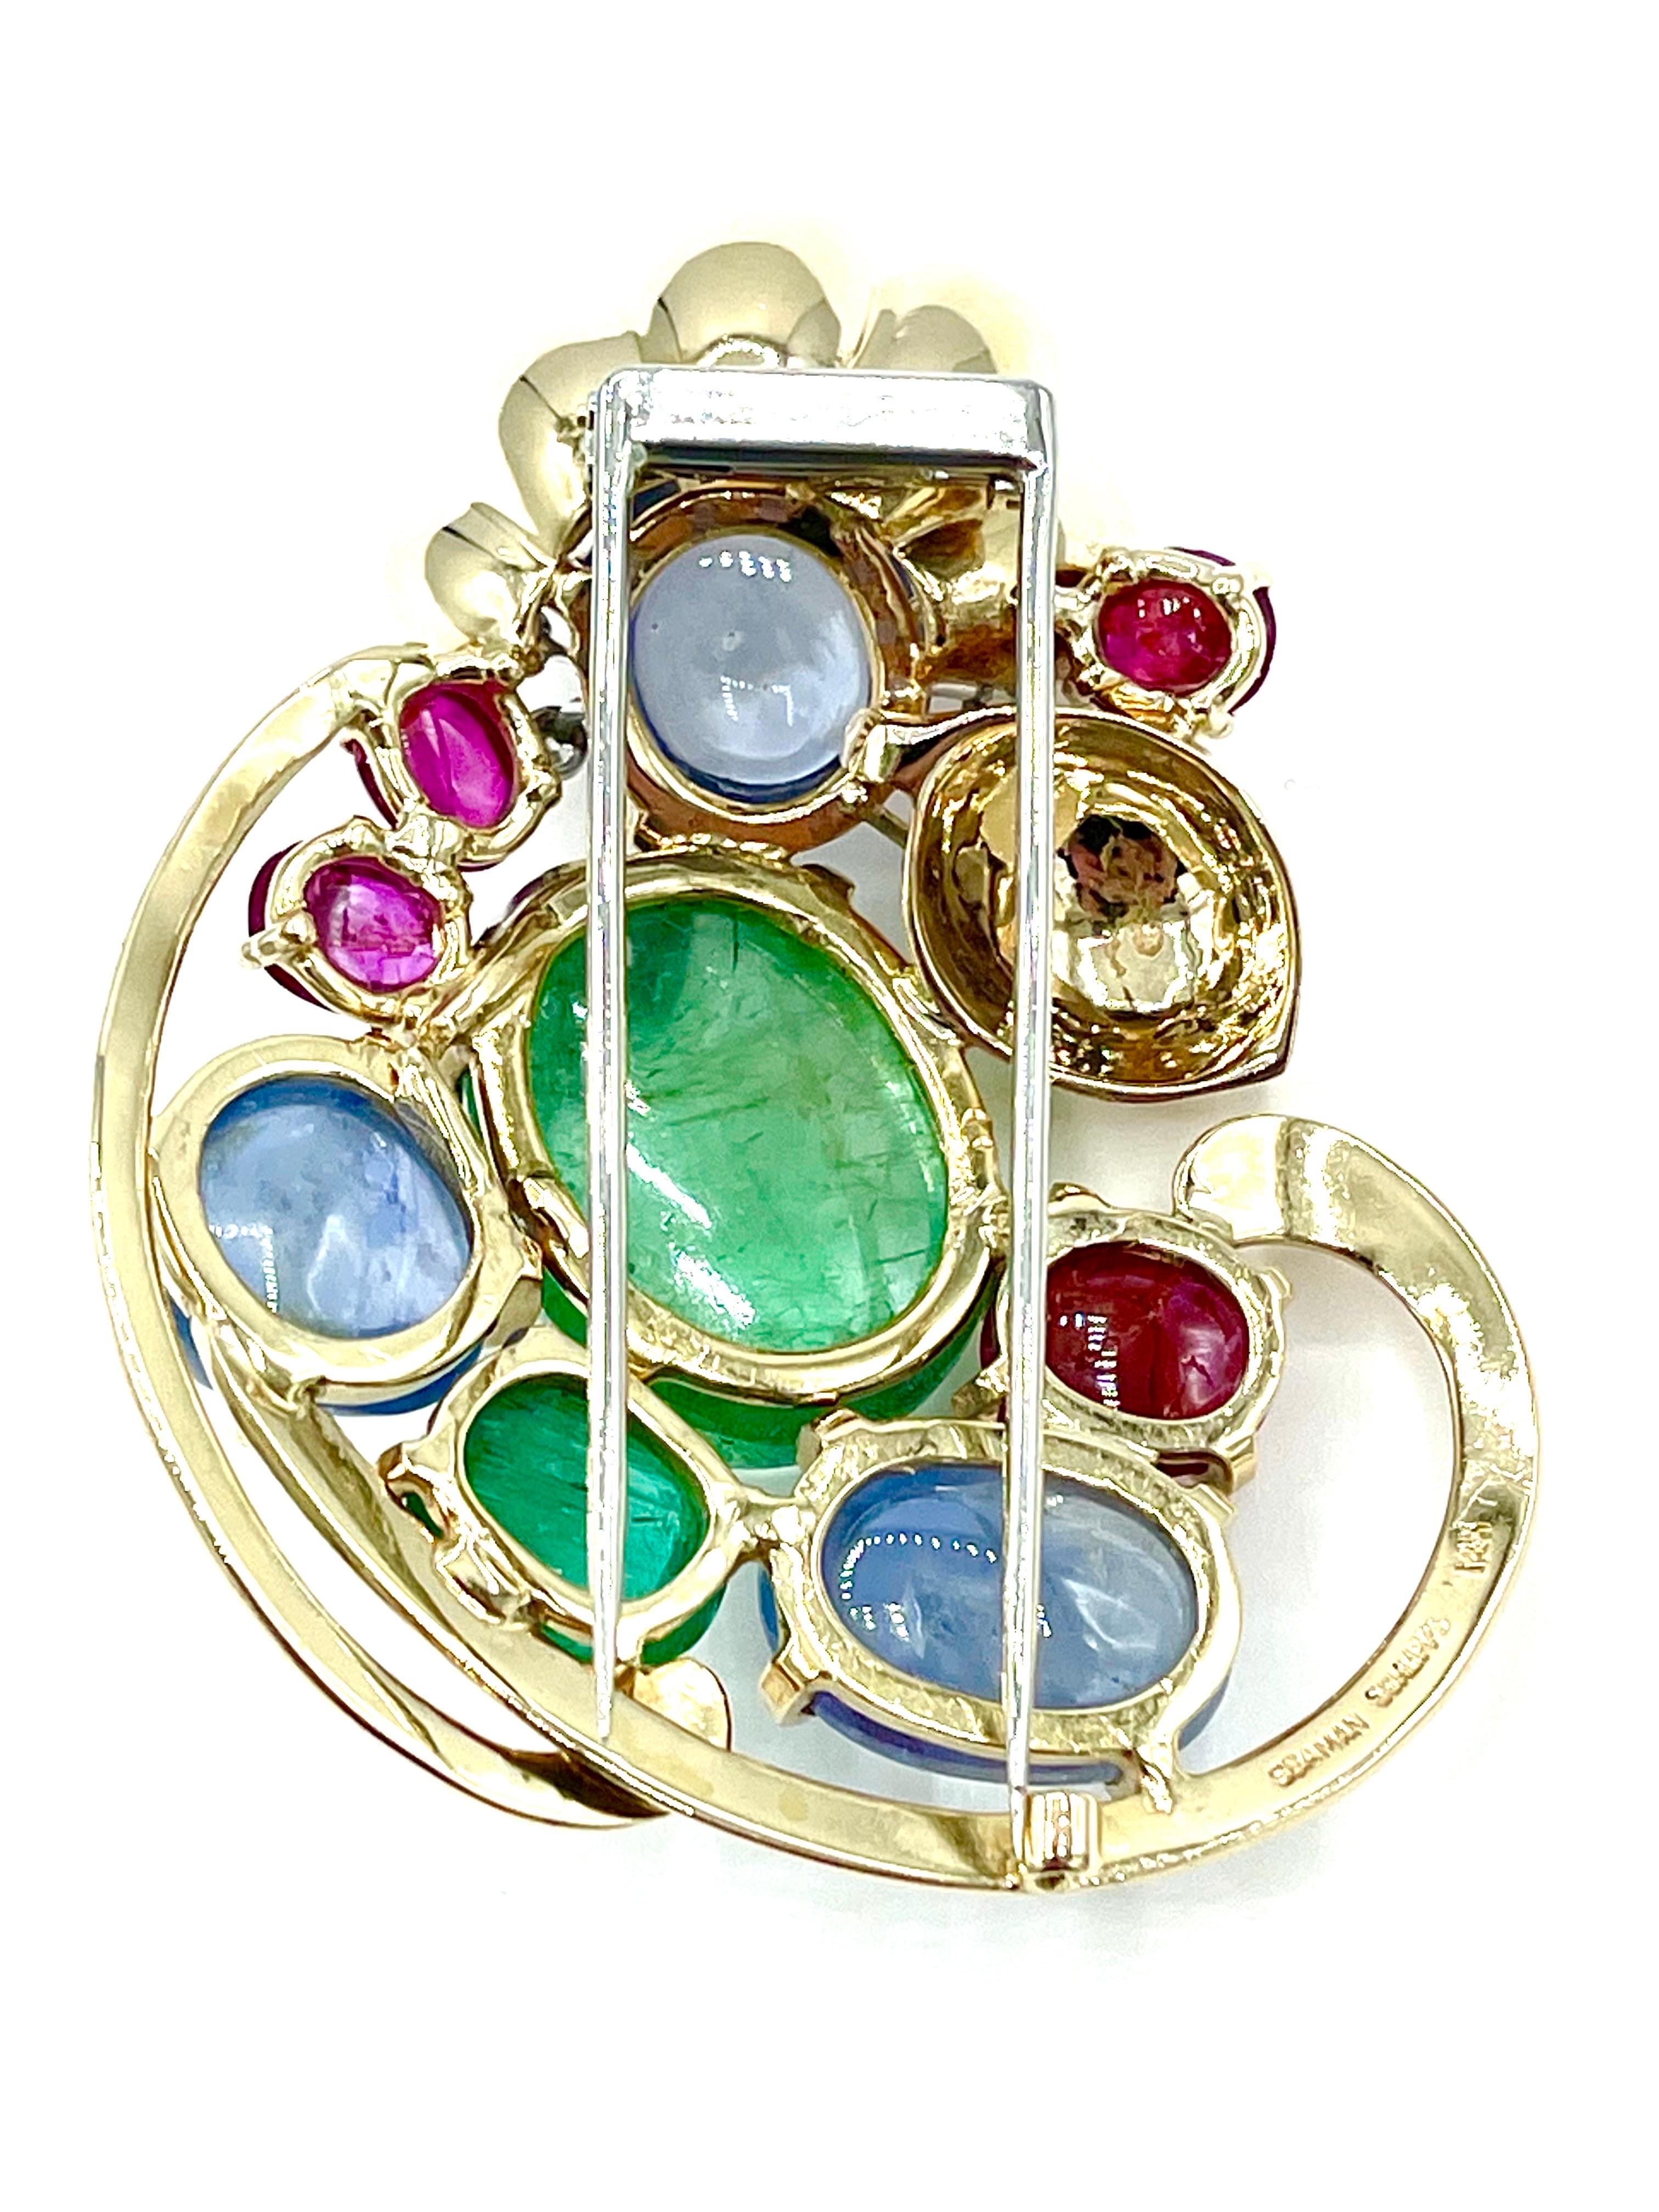 Seaman Schepps Floral Brooch with Cabochon Sapphire, Emerald, Ruby, & Diamonds  In Excellent Condition For Sale In Chevy Chase, MD